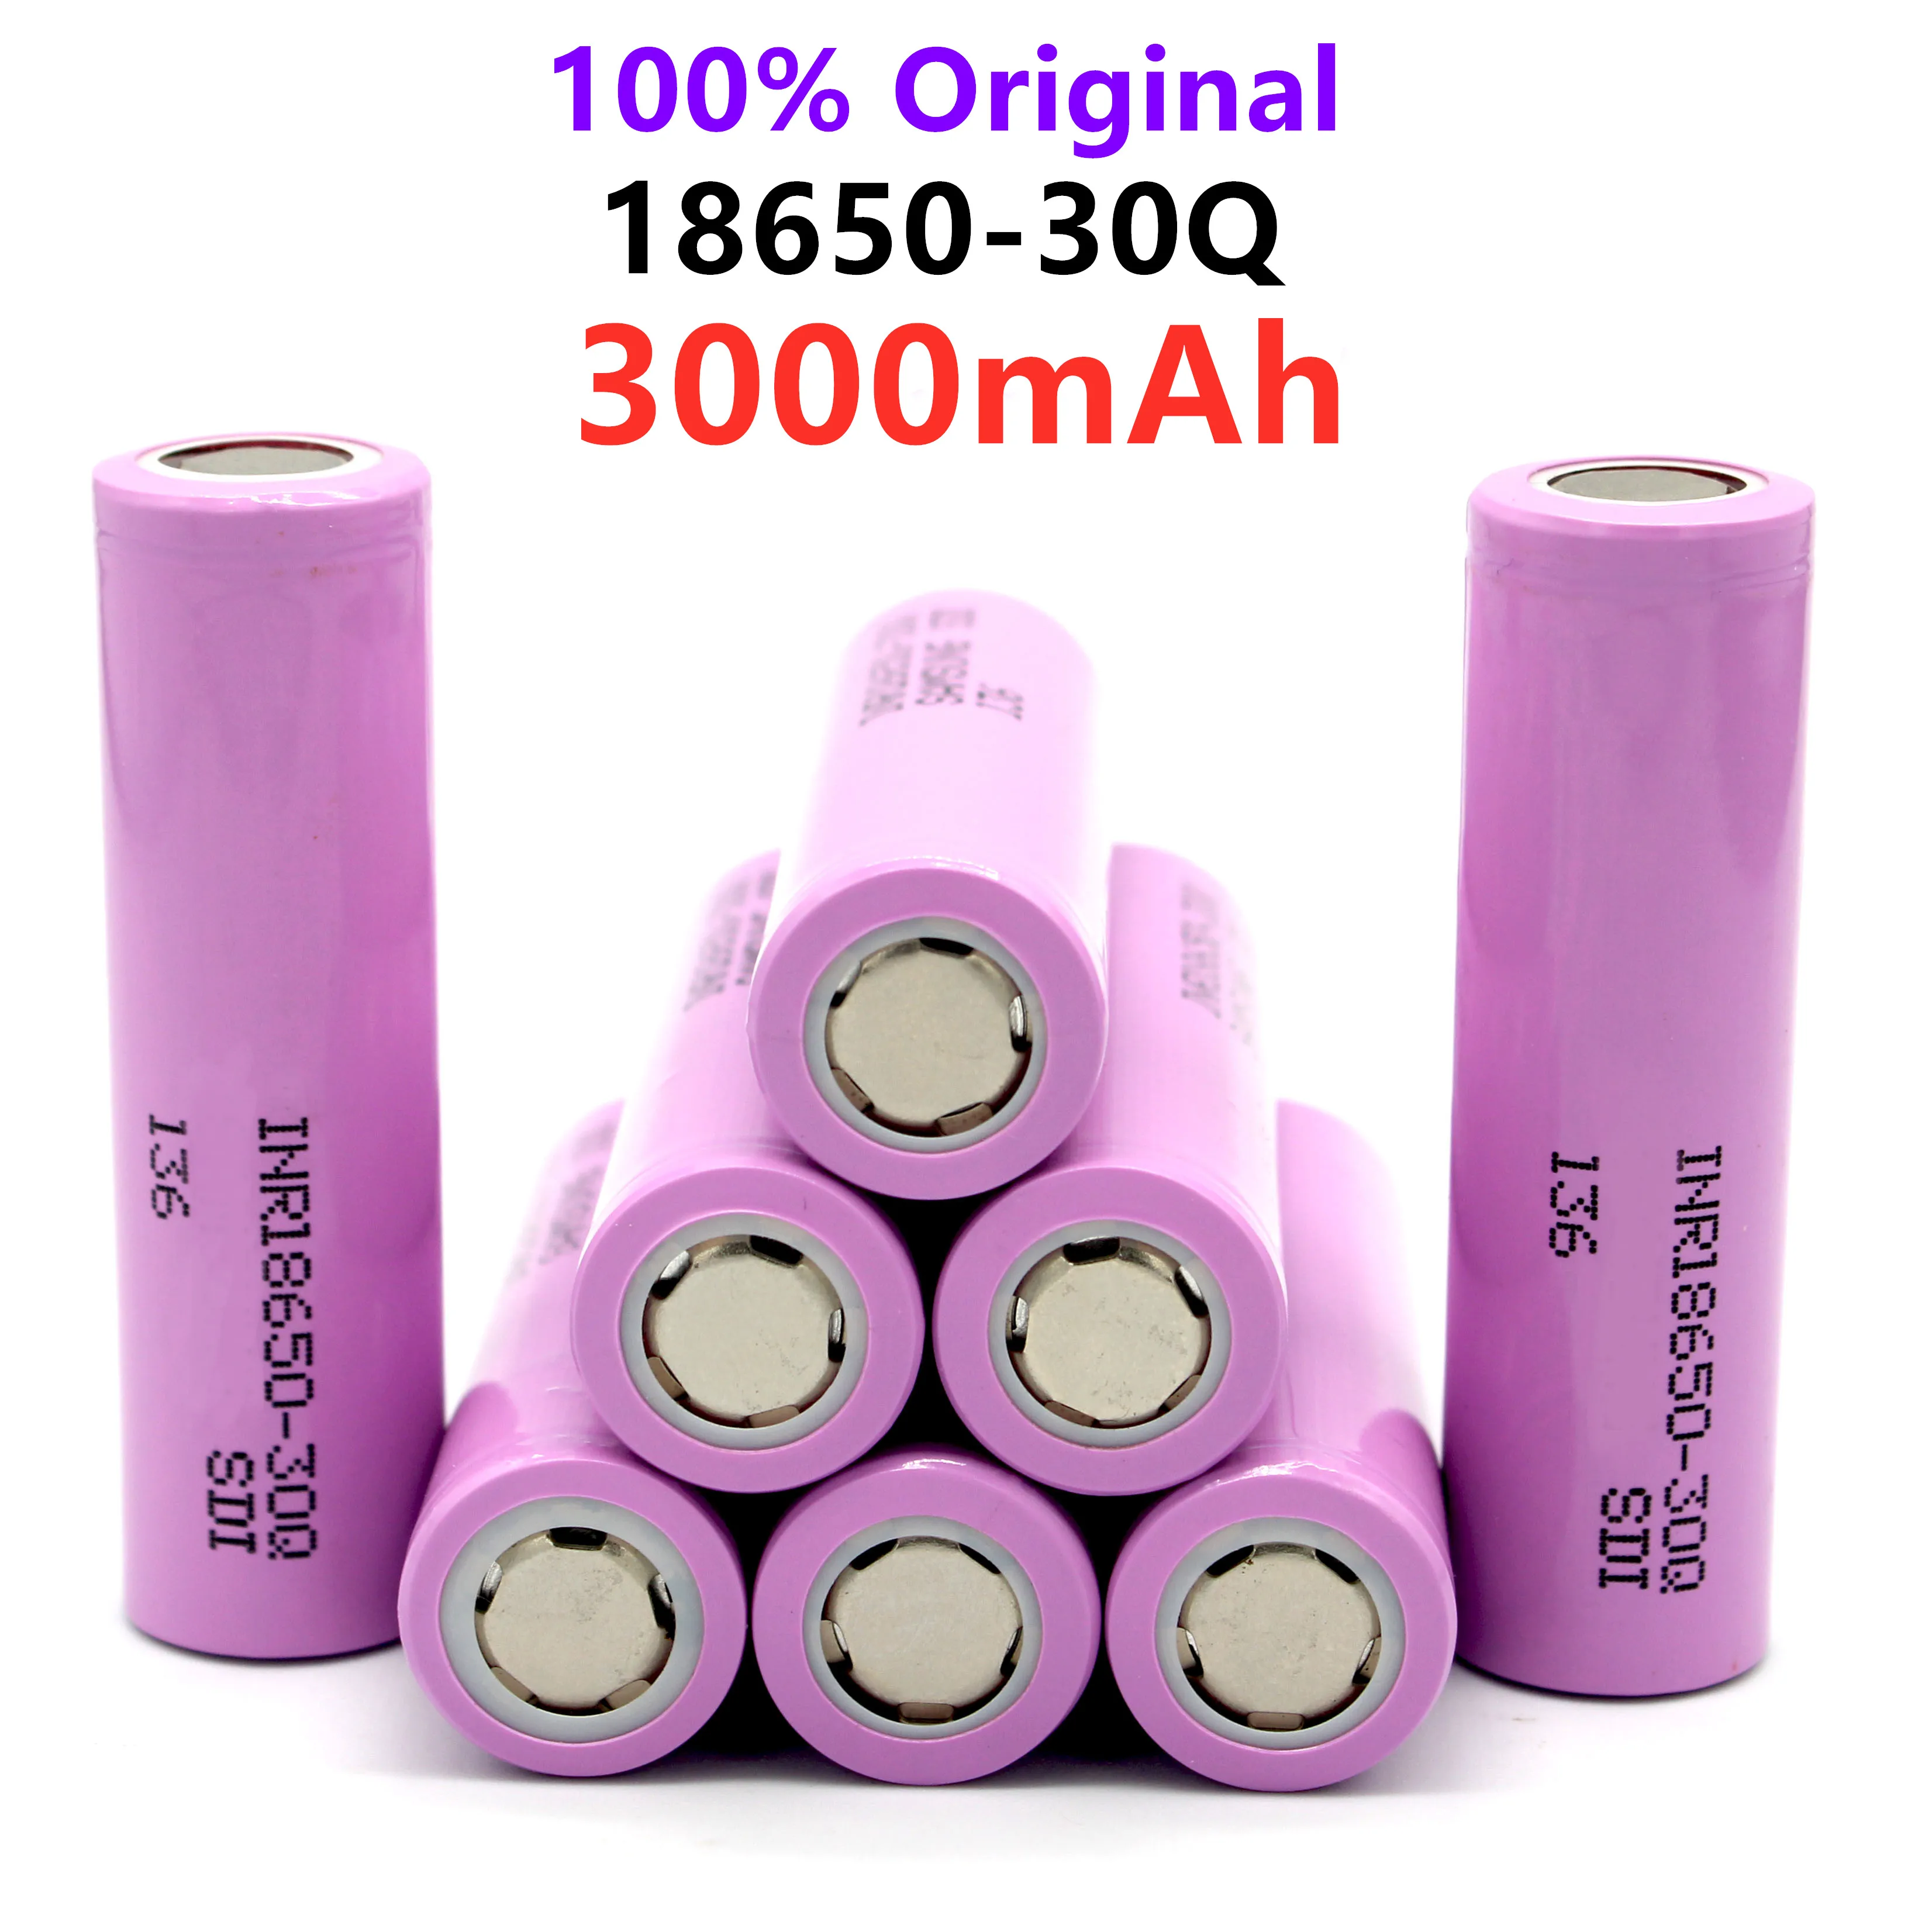 

2-10pcs INR18650 Battery 30Q 3.7V 3000mAh 18650 Lithium Rechargeable Battery 20A Discharge Electrical Tools Flashlight Battery